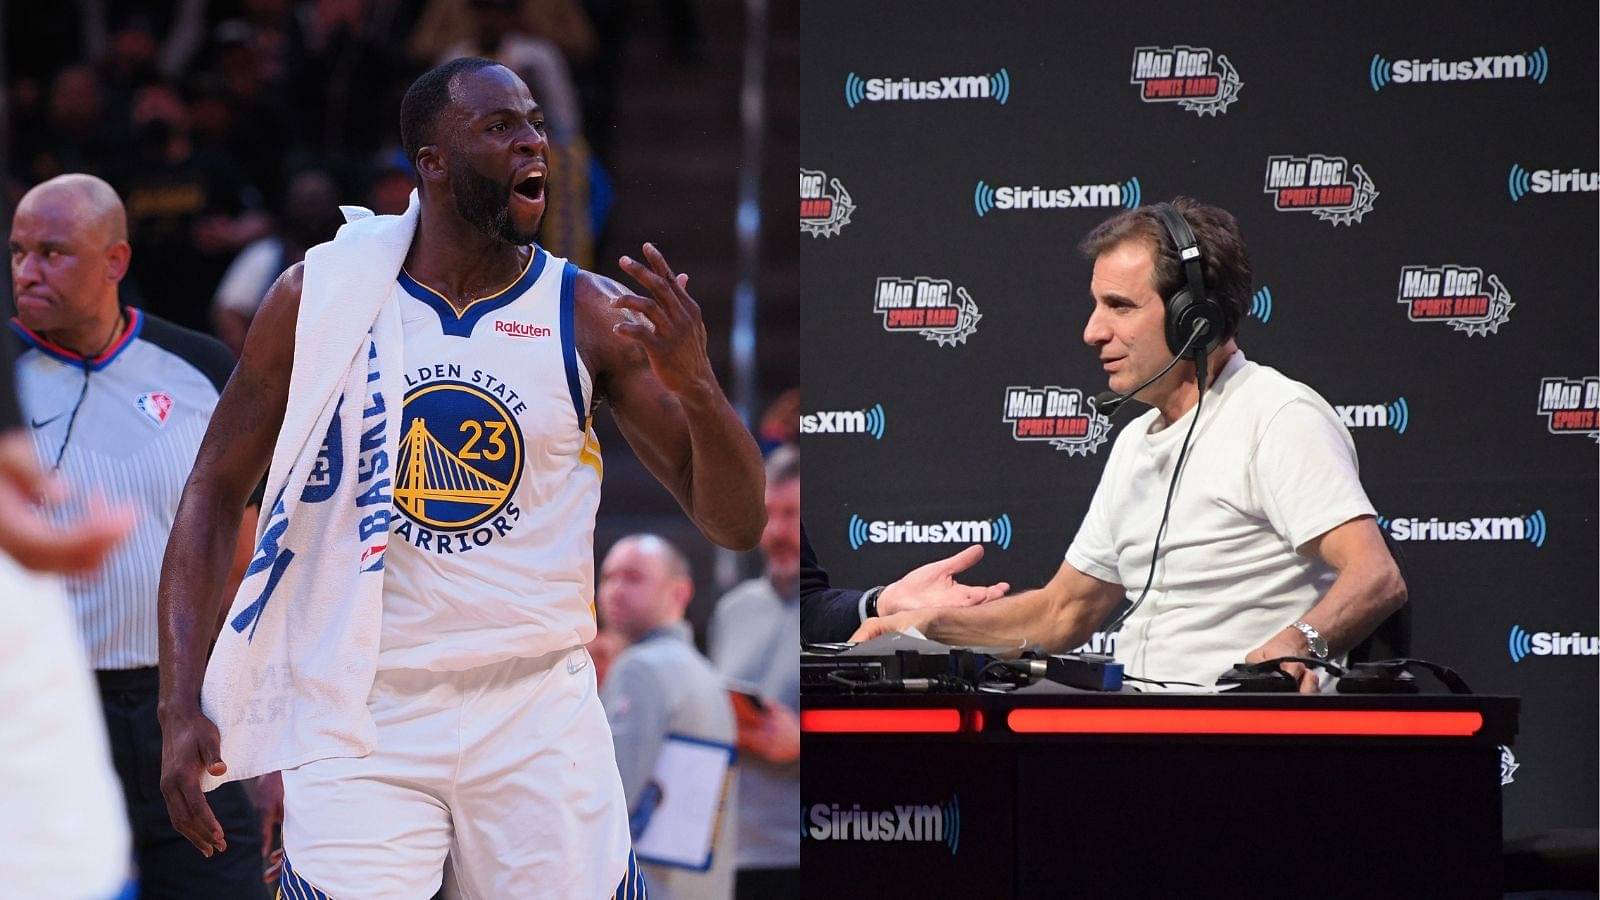 "LeBron James, doesn't this sound familiar?": Draymond Green shuts down Chris 'Mad Dog' Russo for good who asked him to 'Shut up and Play'